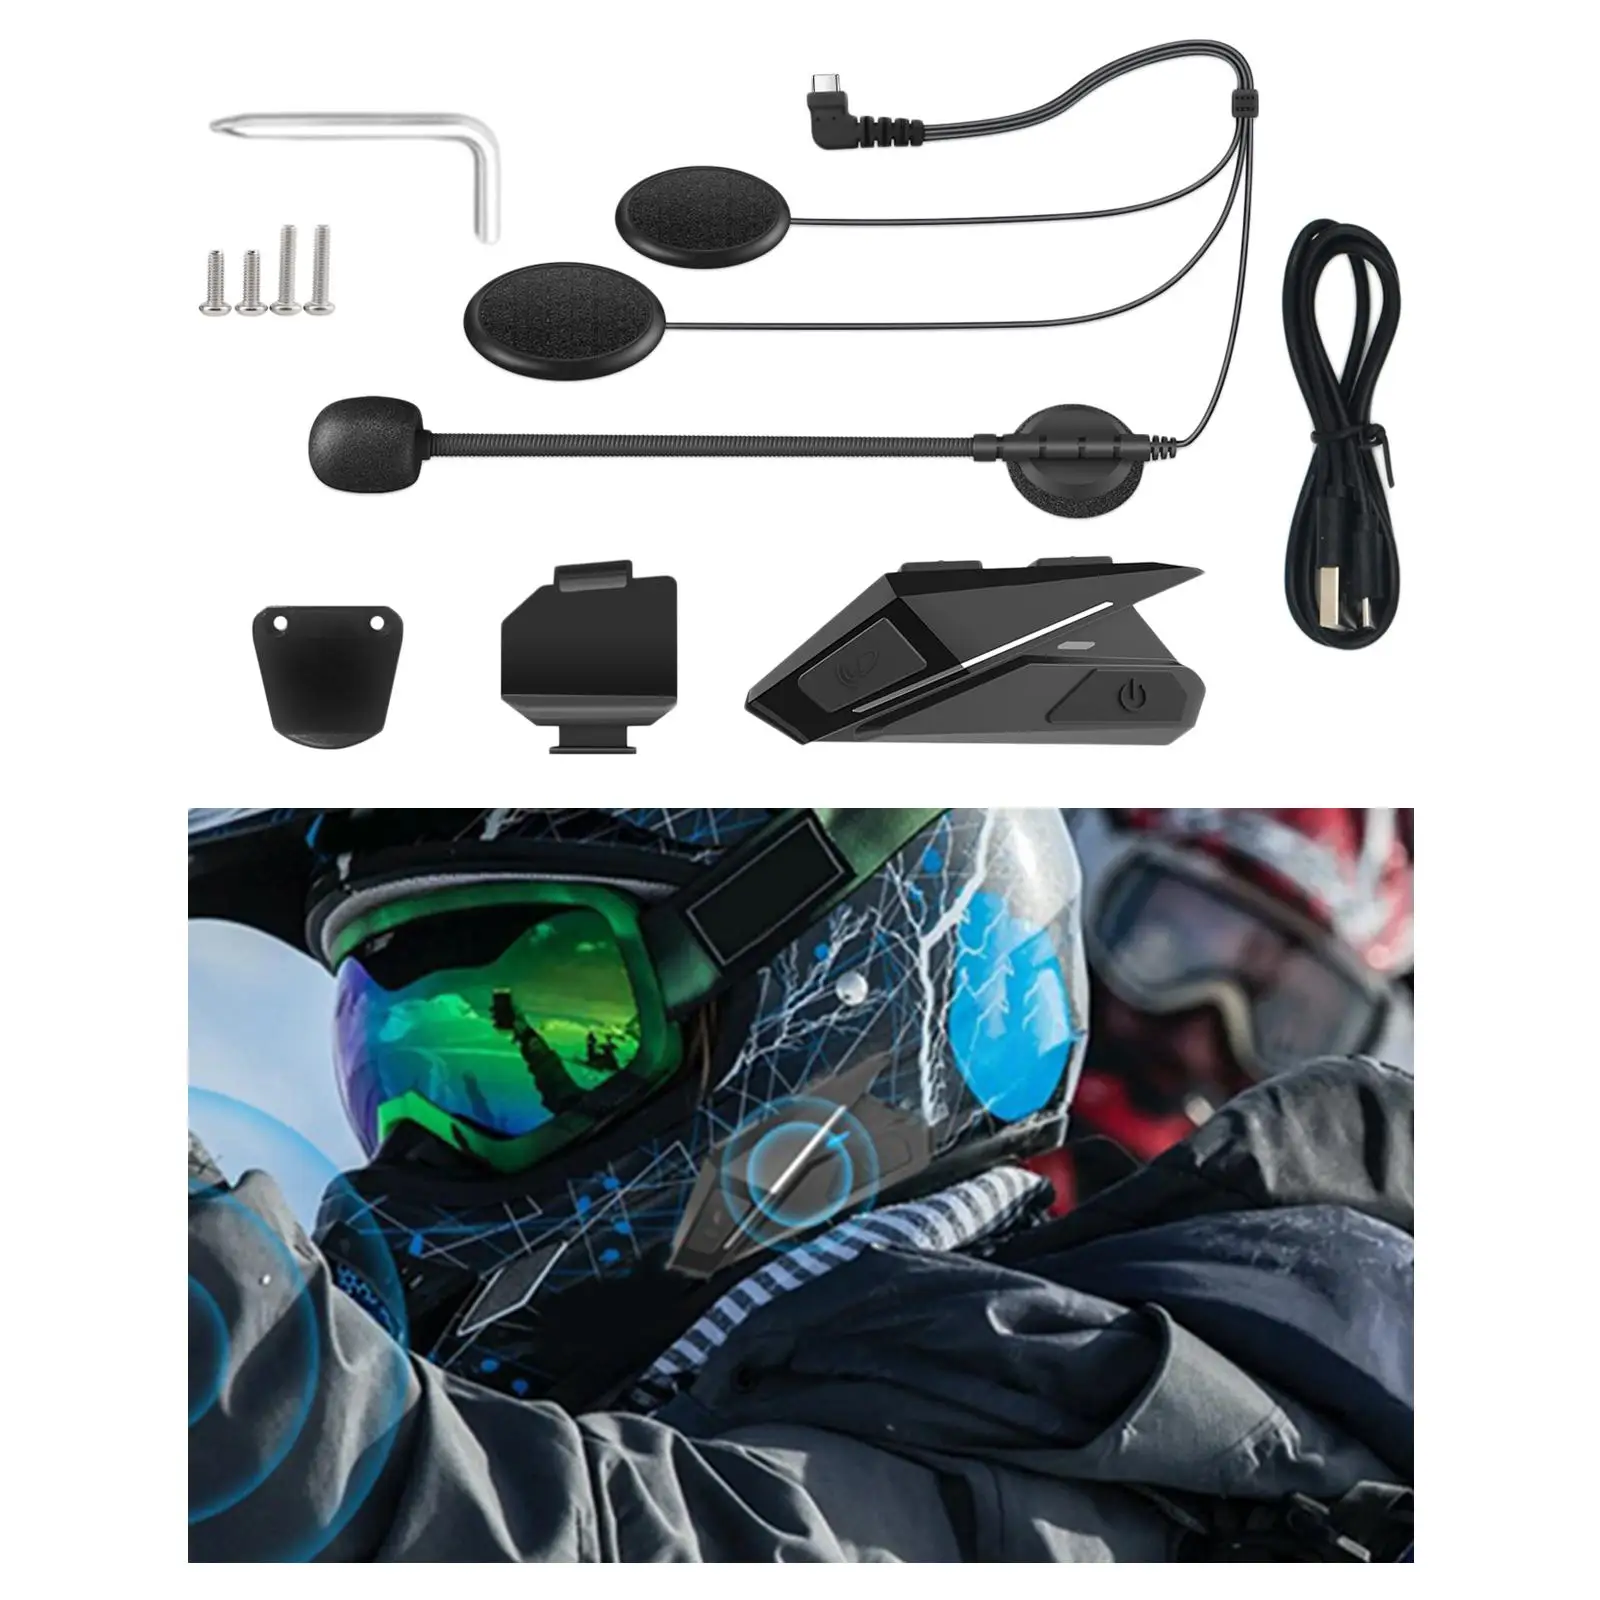 Motorcycle Bluetooth 5.0 Headset 450mAh Battery for Express Delivery Riding